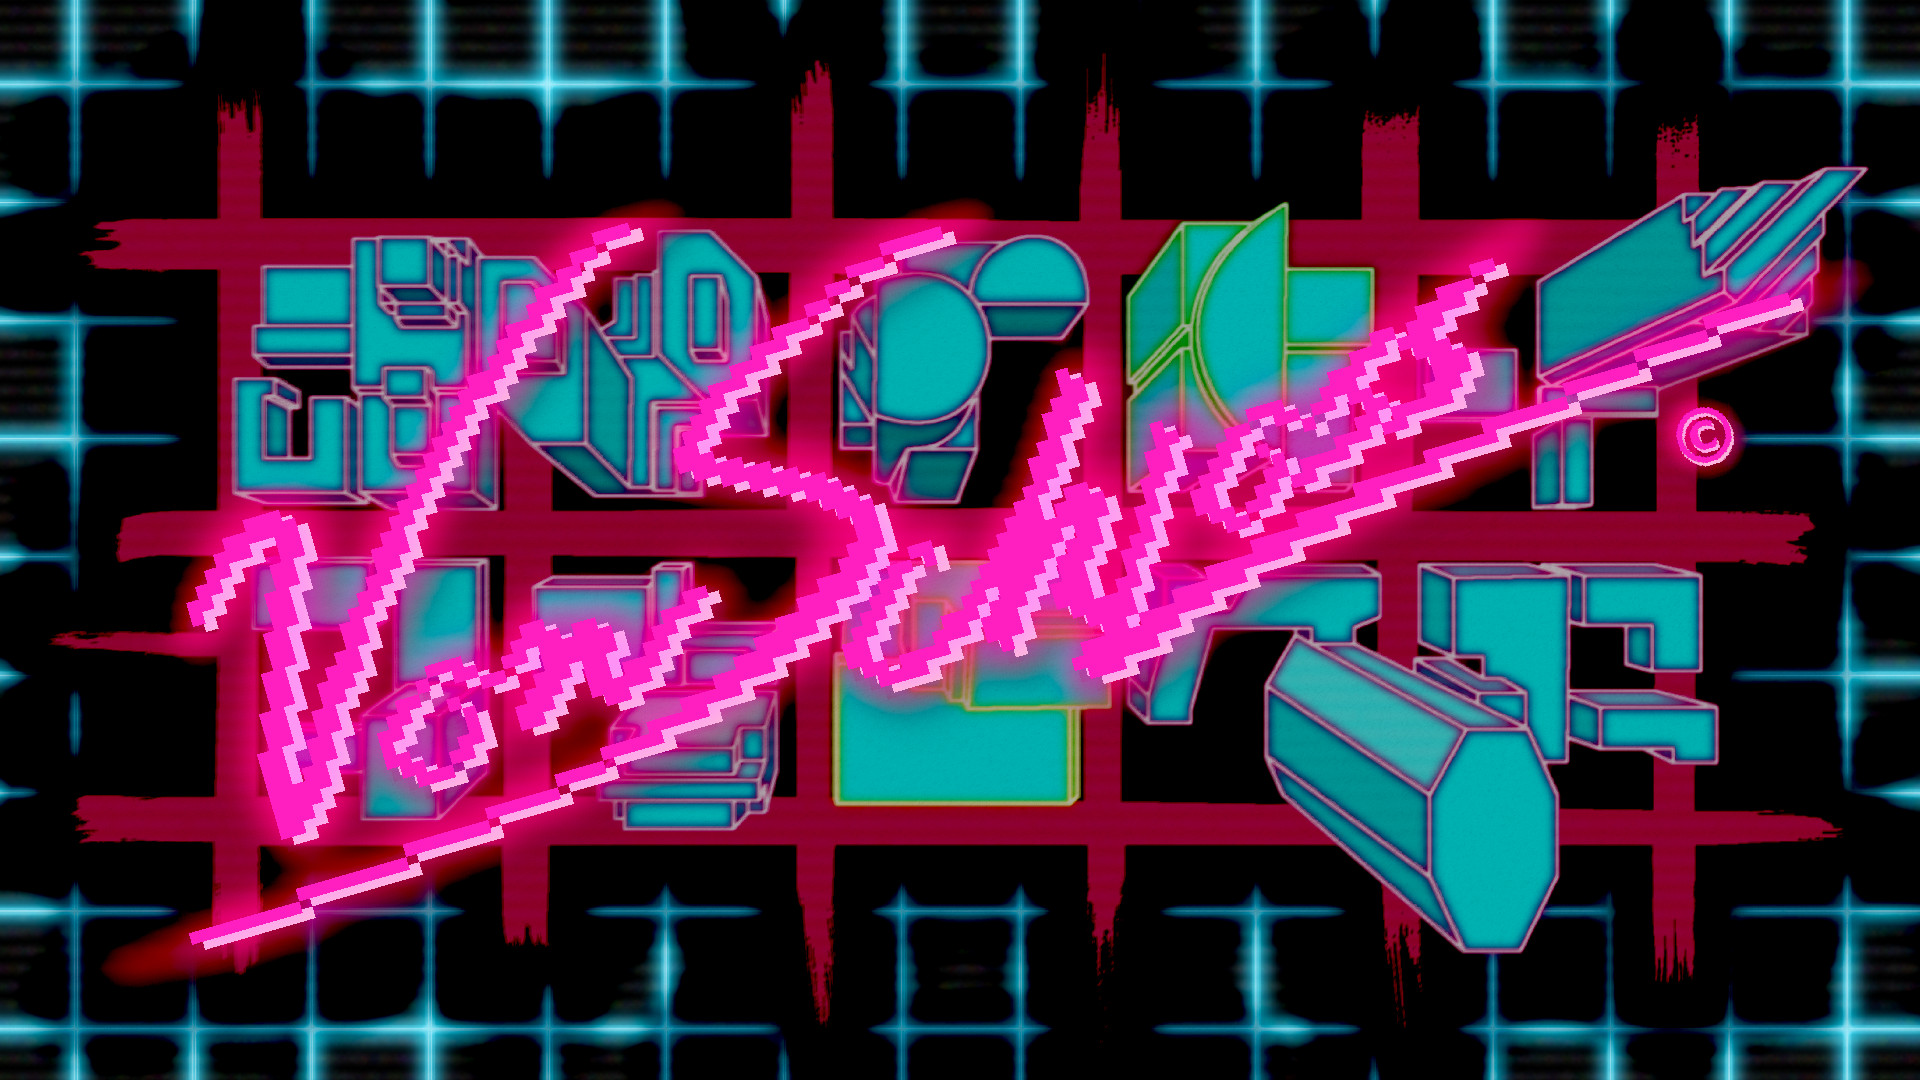 Retrowave styled map with blue neon grid, painted red streets, pink neon buildings, and the pixelized pink Von Schloss logo. It has a cyberpunk, vaporwave, & retrofuturistic aesthetic.